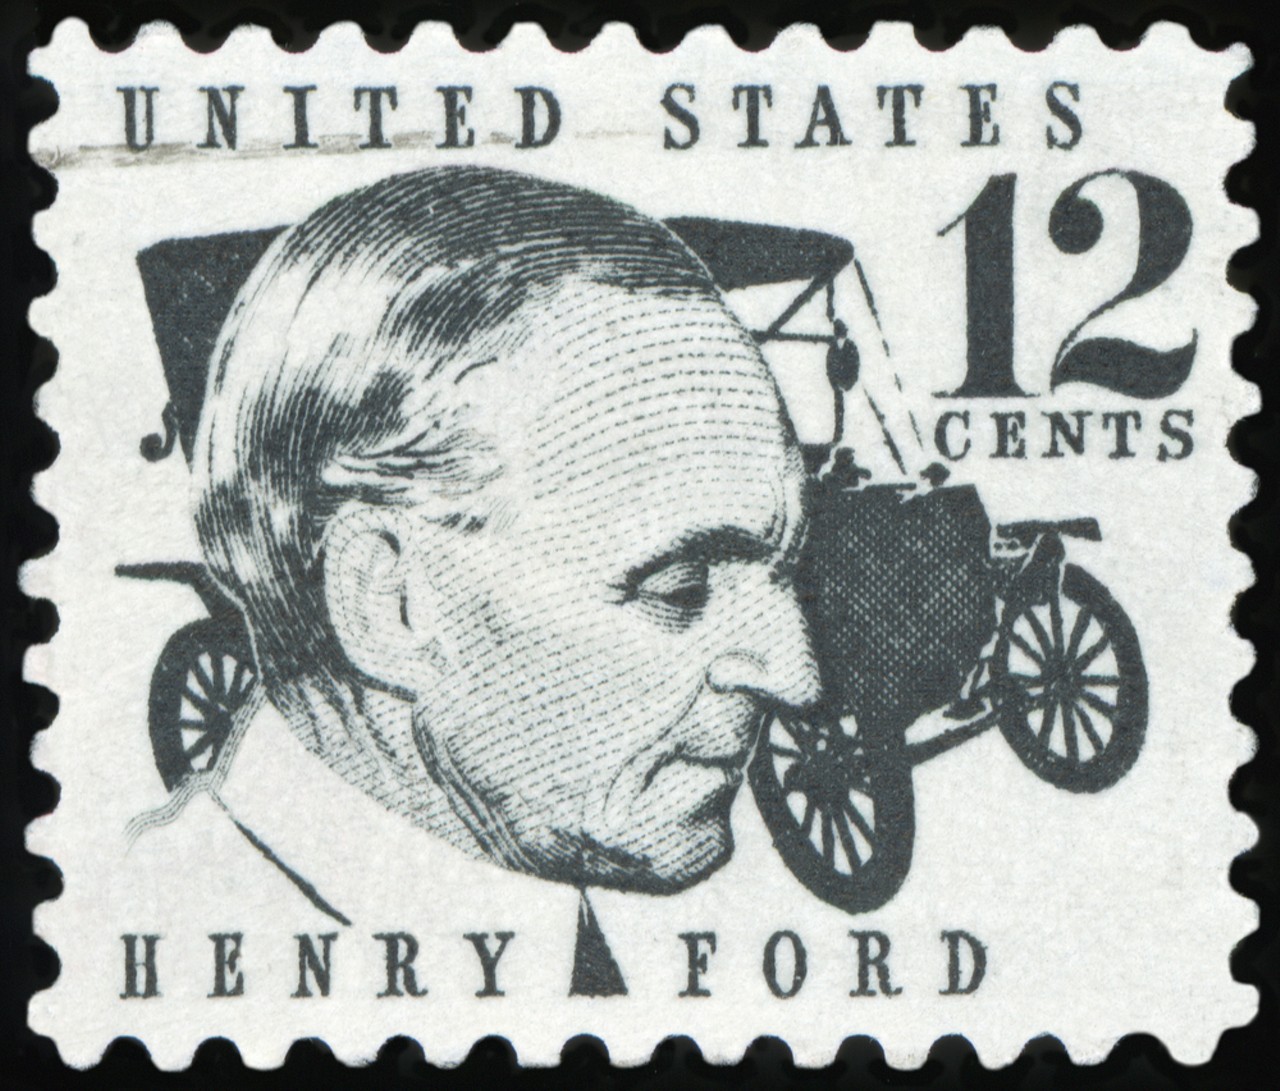 Henry Ford
The industrialist and founder of Ford Motor Company is one of Michigan&#146;s most well-known residents. He was a proponent of the assembly line and is remembered for turning the automobile from a luxury indulgence into an affordable necessity. After his death in 1947, Ford was buried in the Ford Cemetery in Detroit.
Photo via MM Photos / Shutterstock